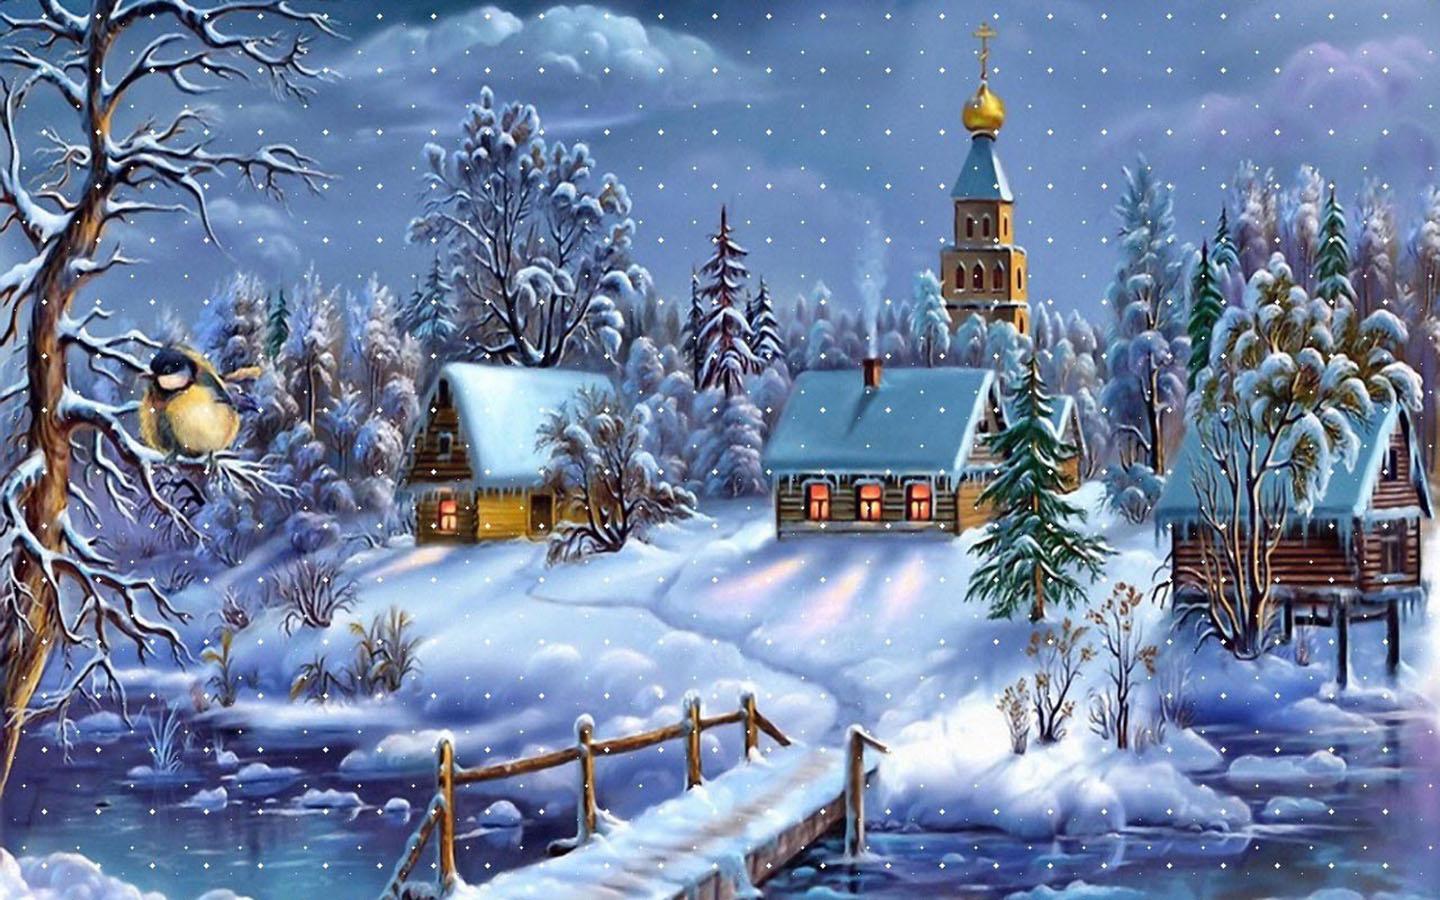 Christmas Tree Decorations Gifts Forest Winter Snow Snow Wallpapers Hd   Wallpapers13com